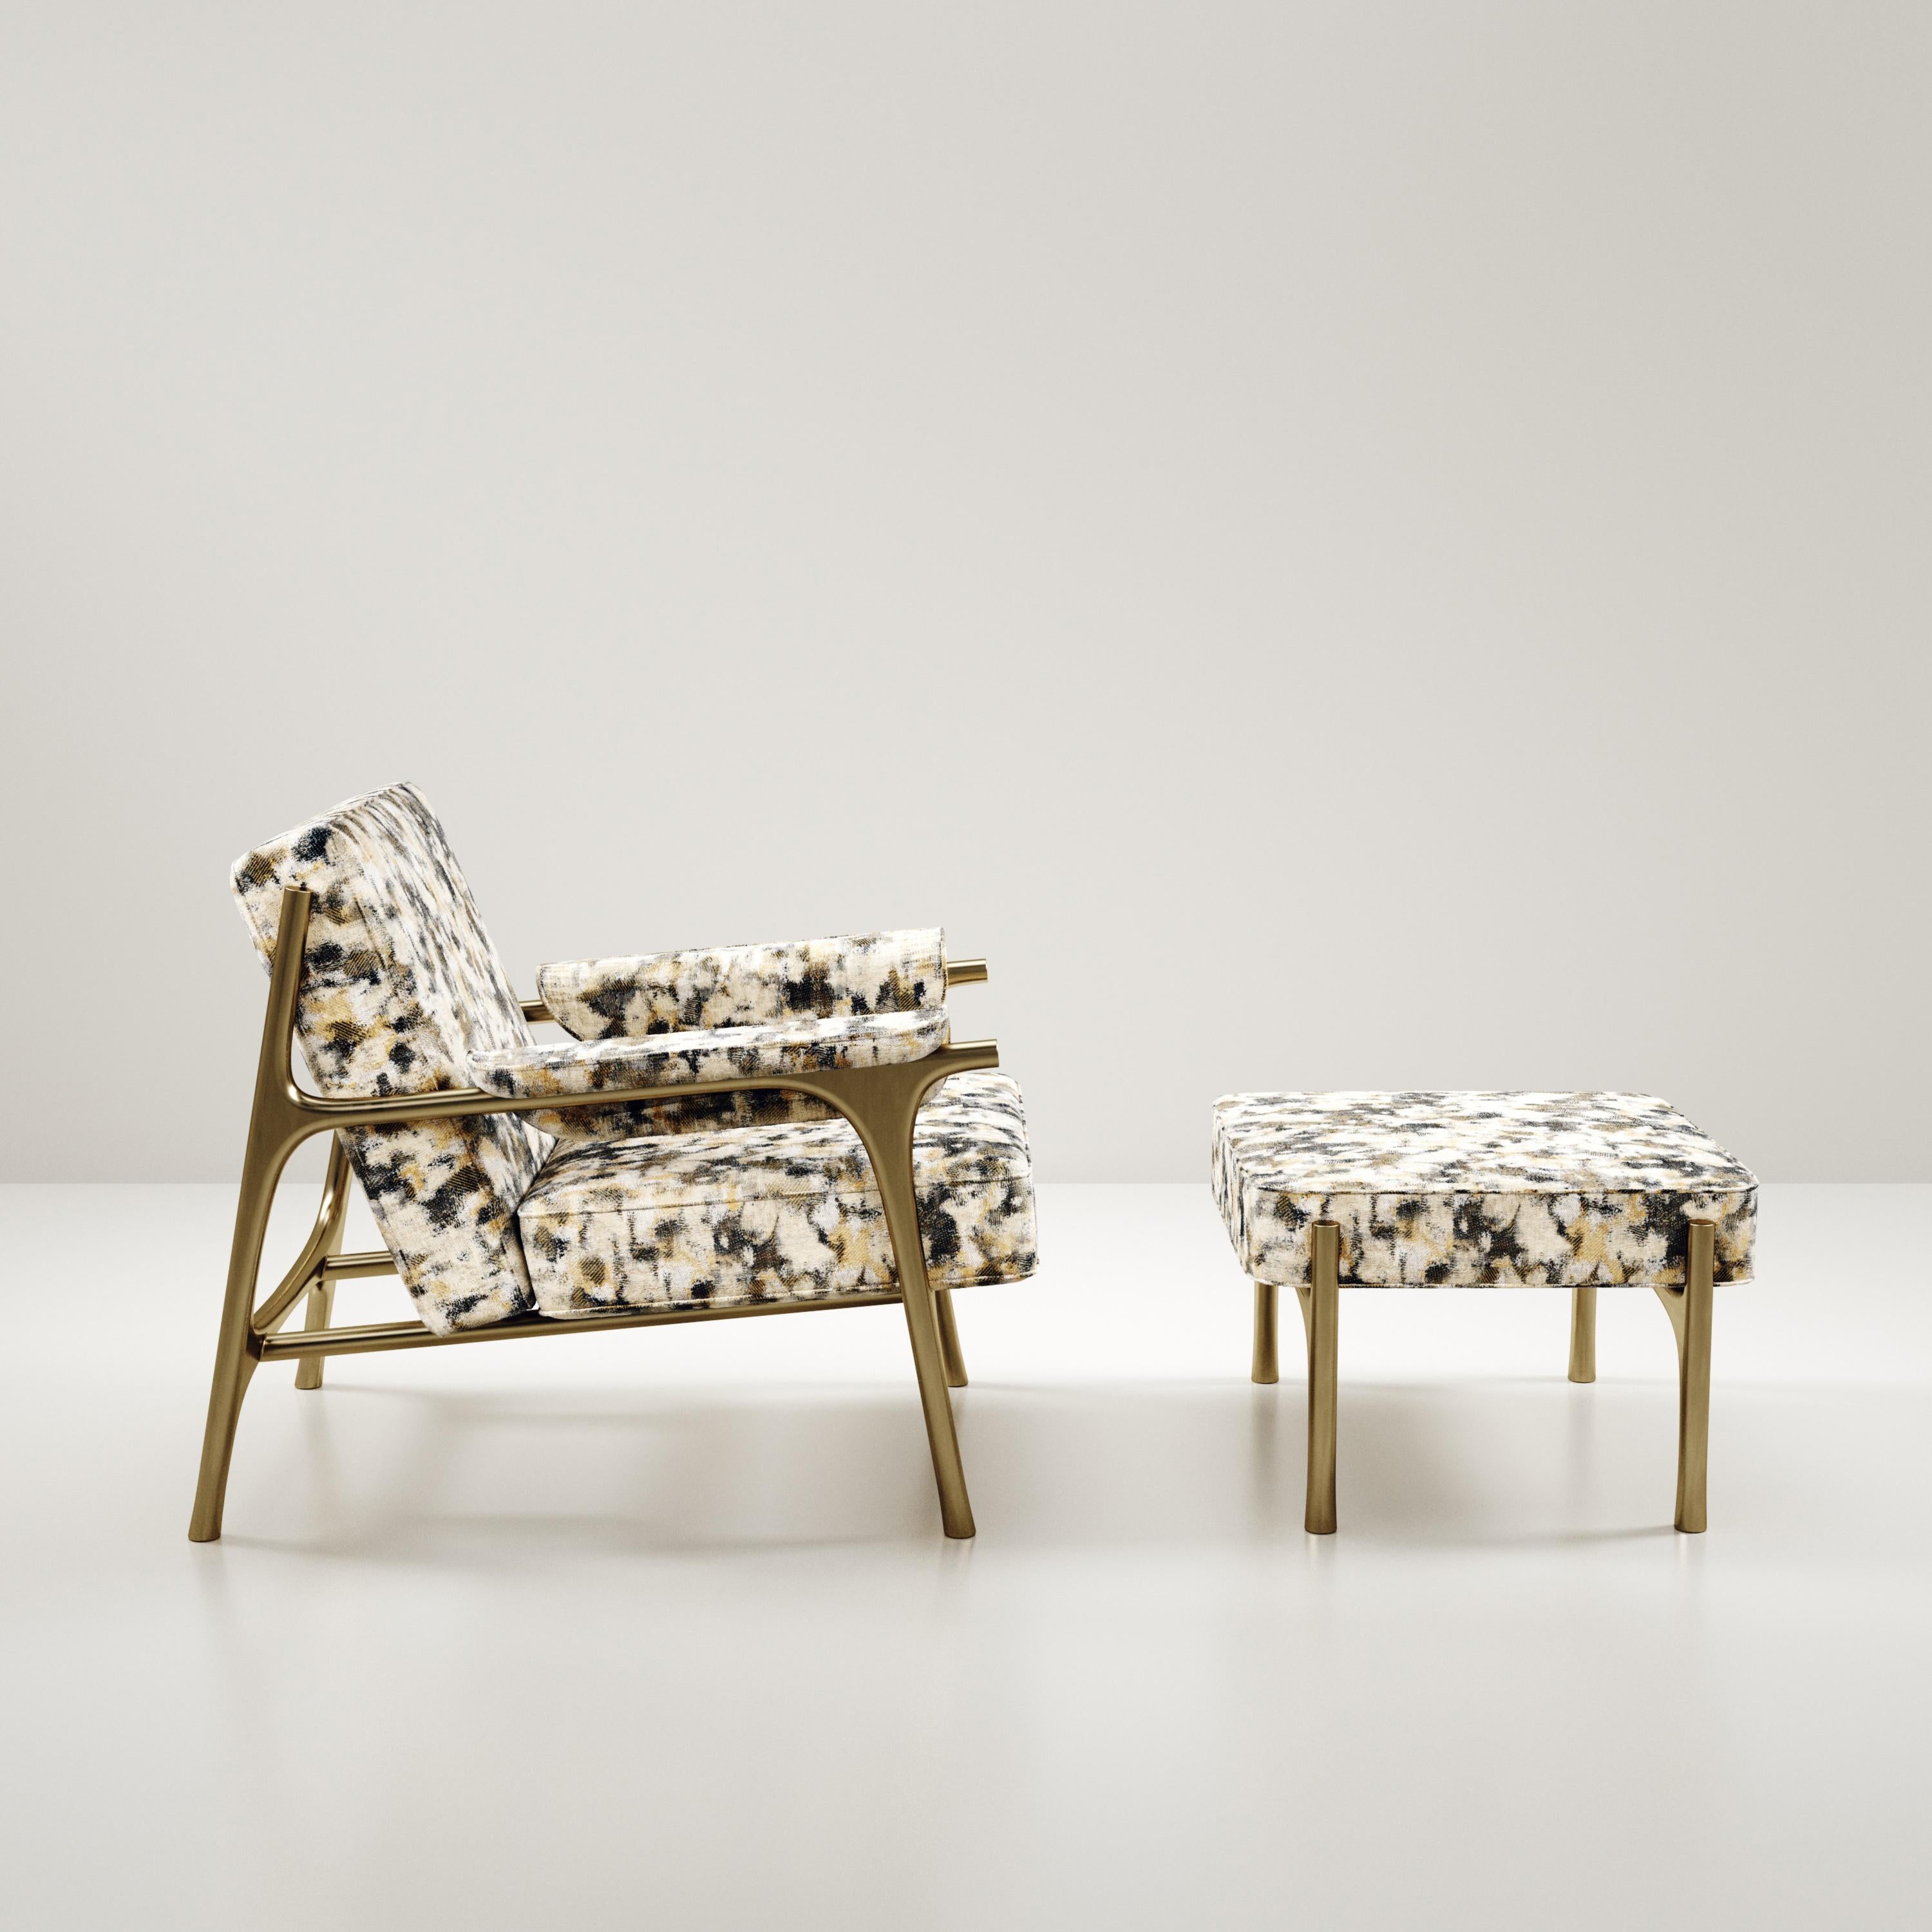 The Ramo Armchair & Footstool Set by R & Y Augousti is an elegant and versatile piece. The upholstered pieces in camouflage Pierre Frey fabric provide comfort while retaining a unique aesthetic with the bronze-patina brass frame and details. This